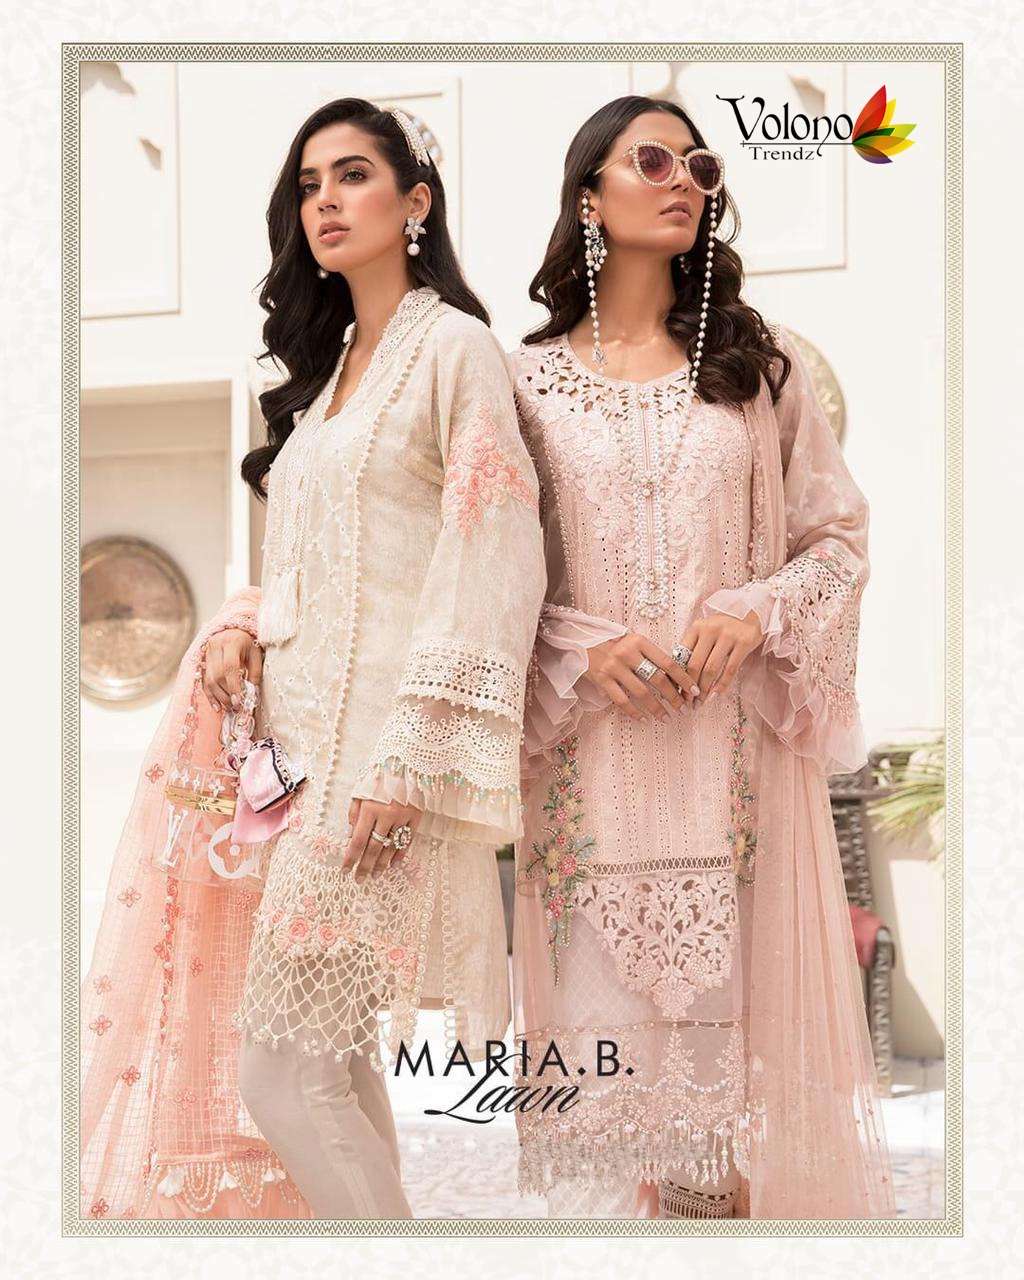 MARIA.B. LAWN BY VOLONO TRENDZ 1001 TO 1002 SERIES BEAUTIFUL PAKISTANI SUITS STYLISH FANCY COLORFUL PARTY WEAR & ETHNIC WEAR CAMBRIC EMBROIDERY DRESSES AT WHOLESALE PRICE